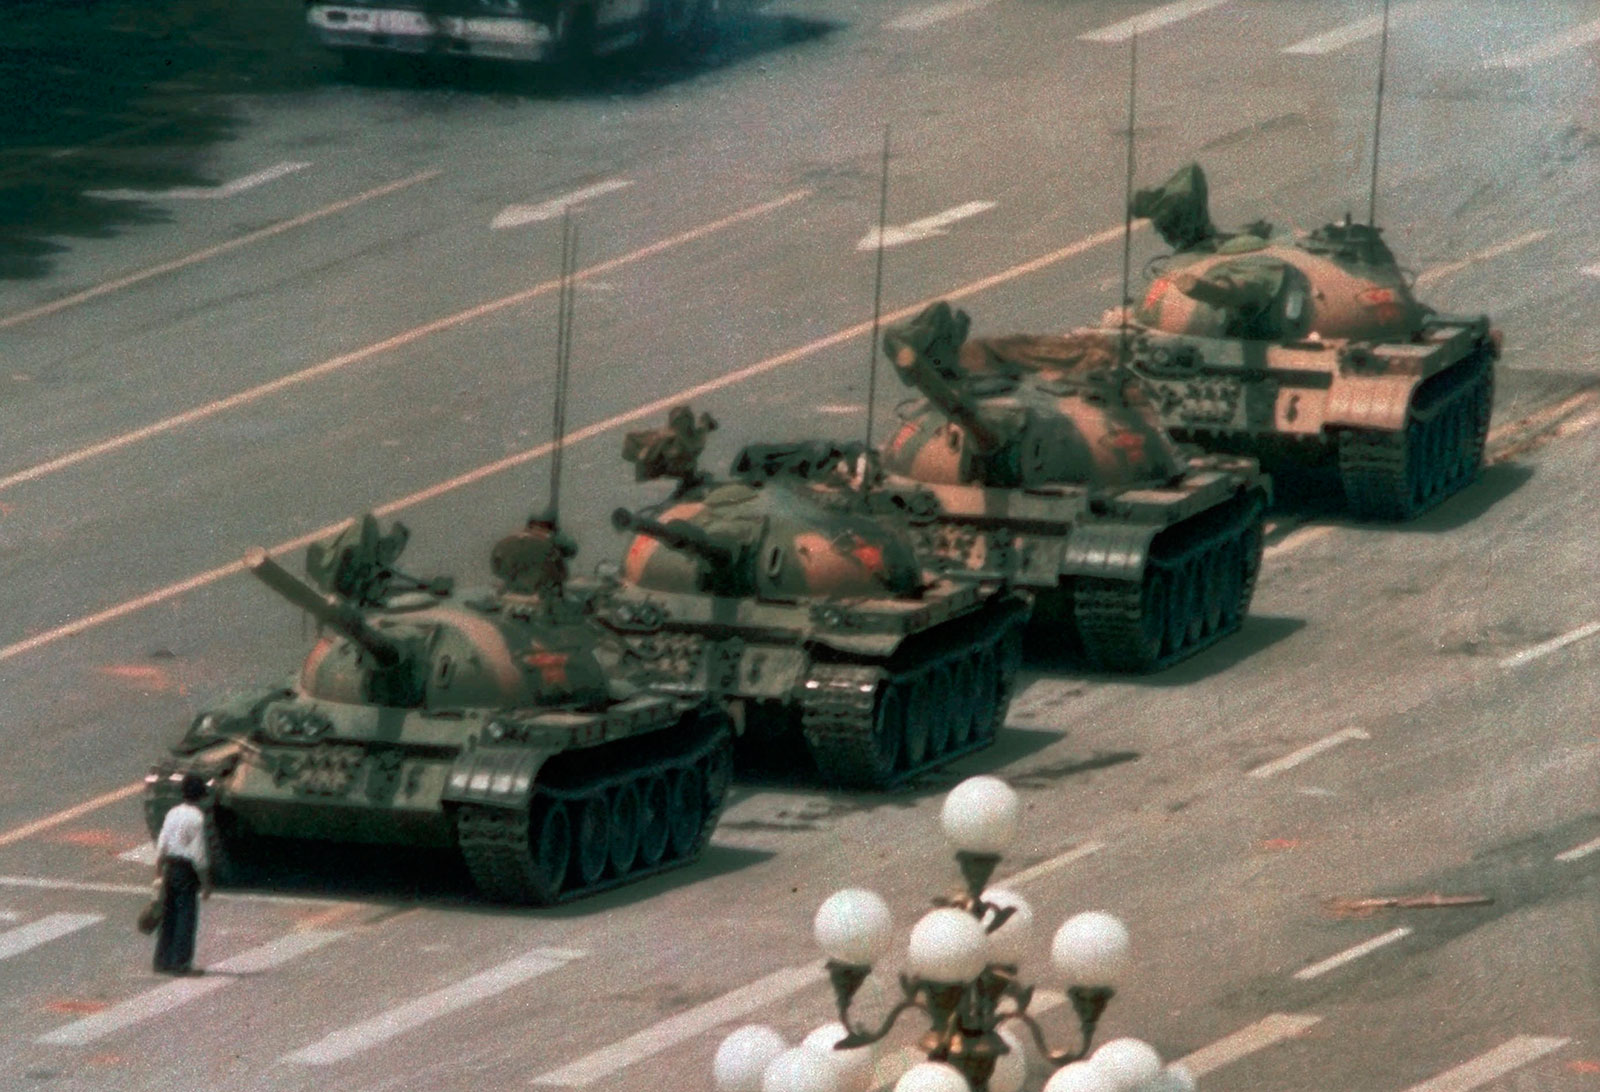 The story behind the iconic 'Tank Man' photo - CNN.com